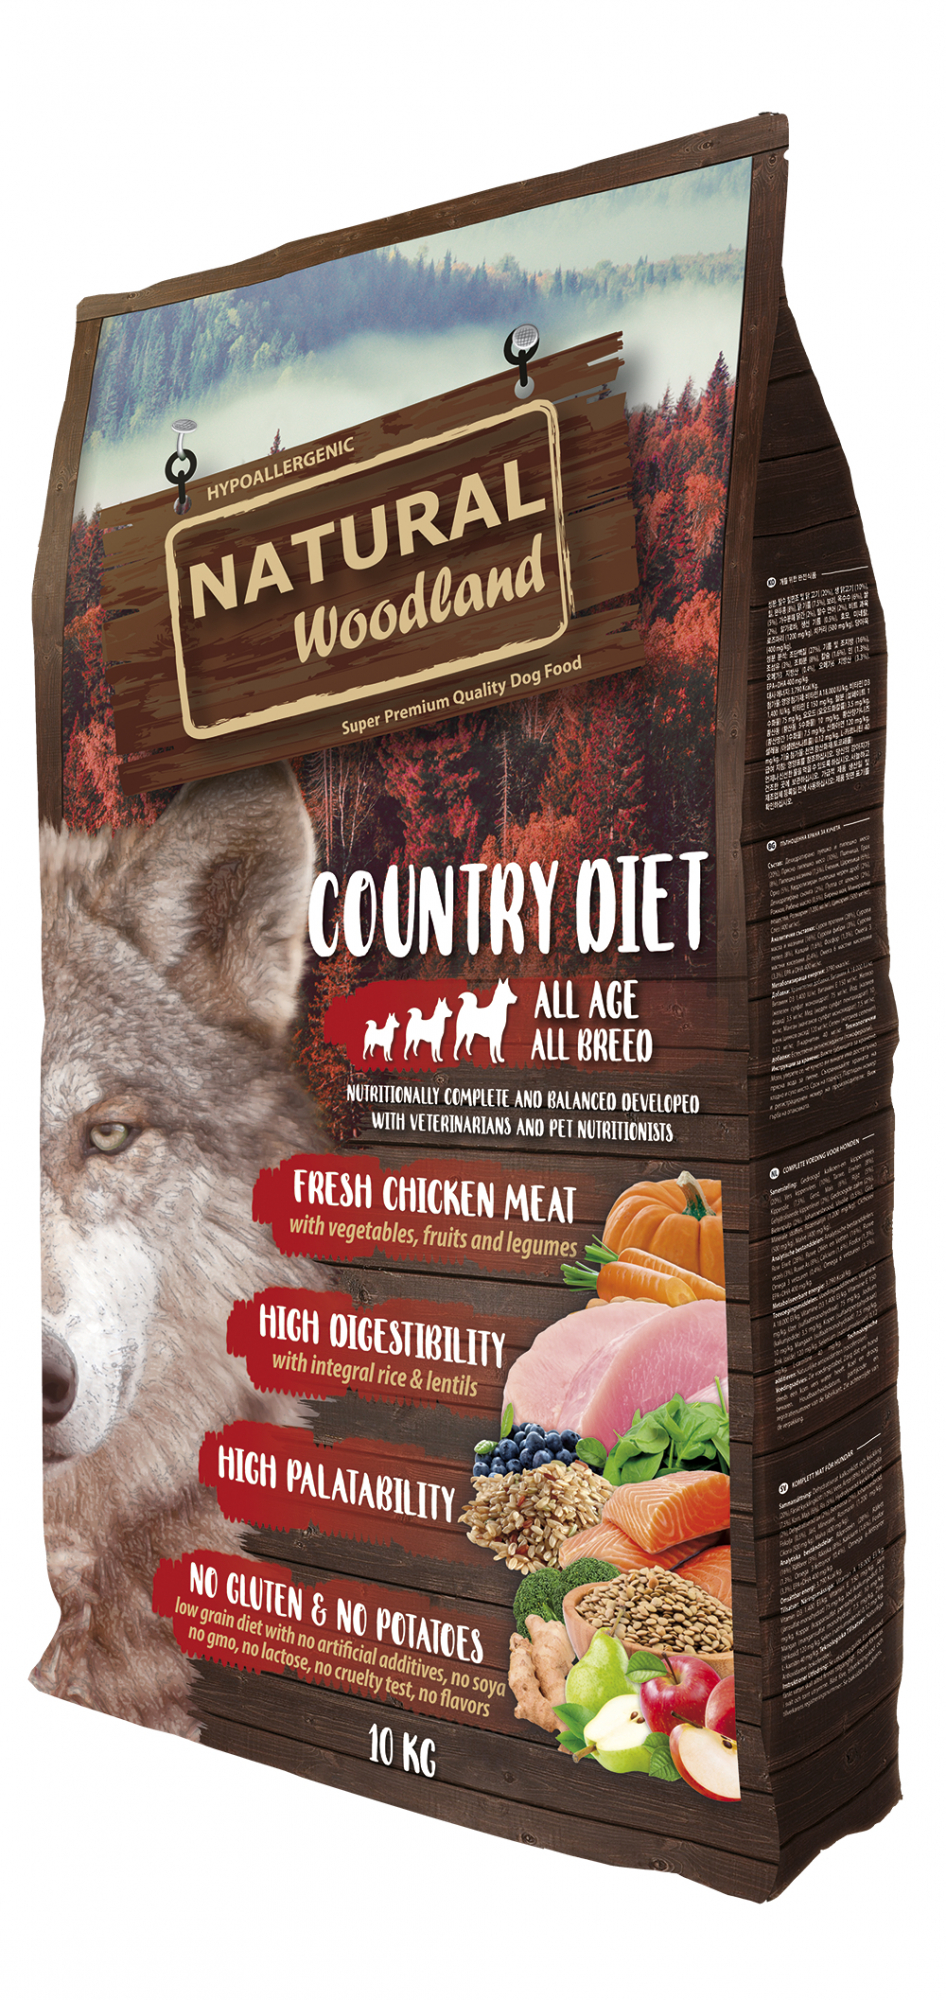 NATURAL WOODLAND Country diet